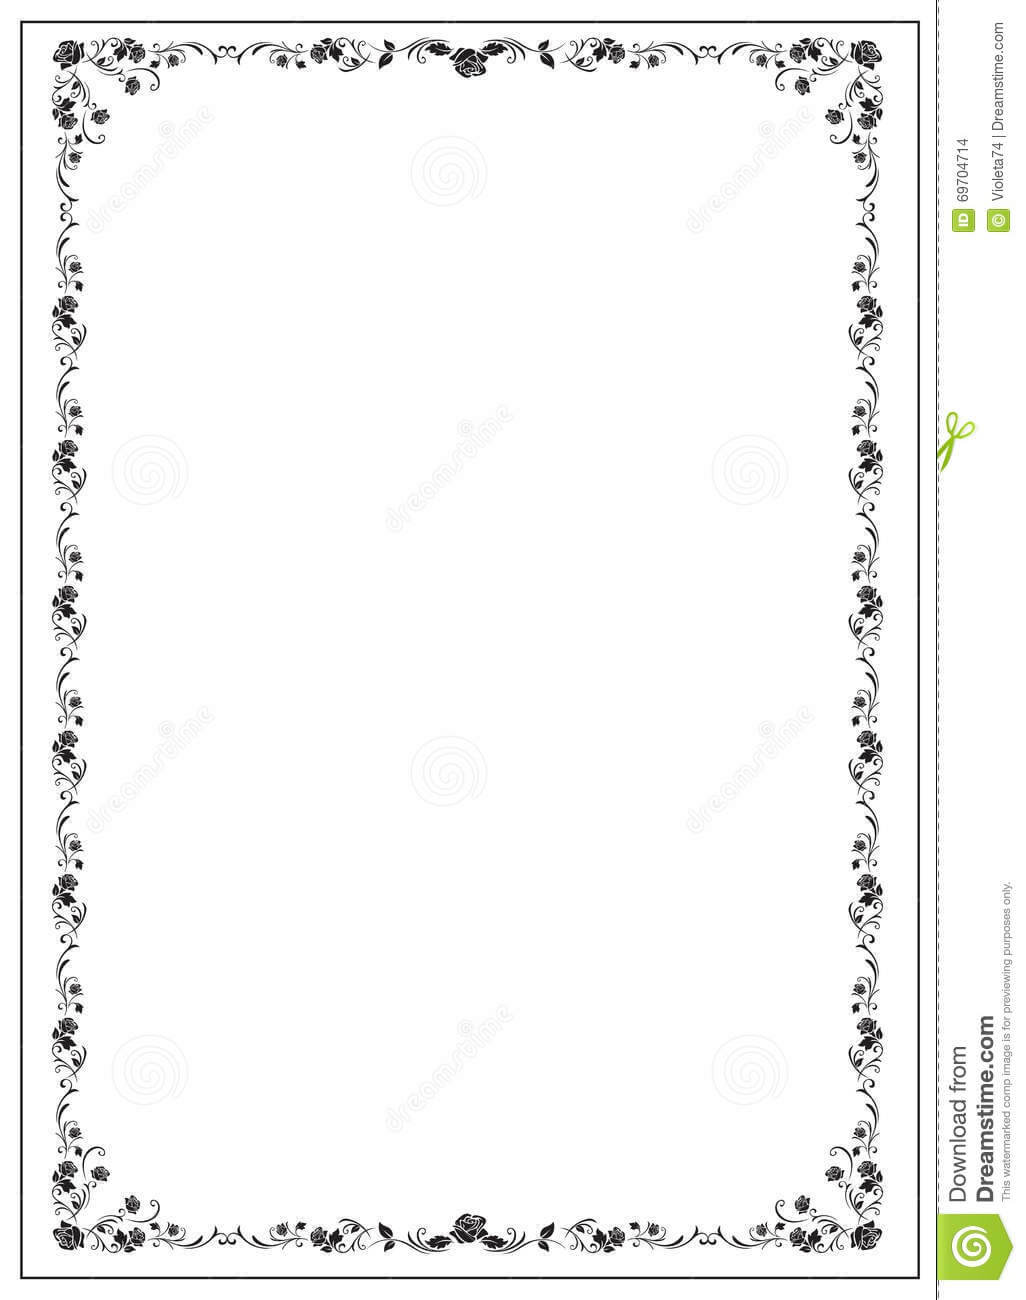 Certificate Template With Floral Rose Elements. Stock Vector Pertaining To Certificate Border Design Templates